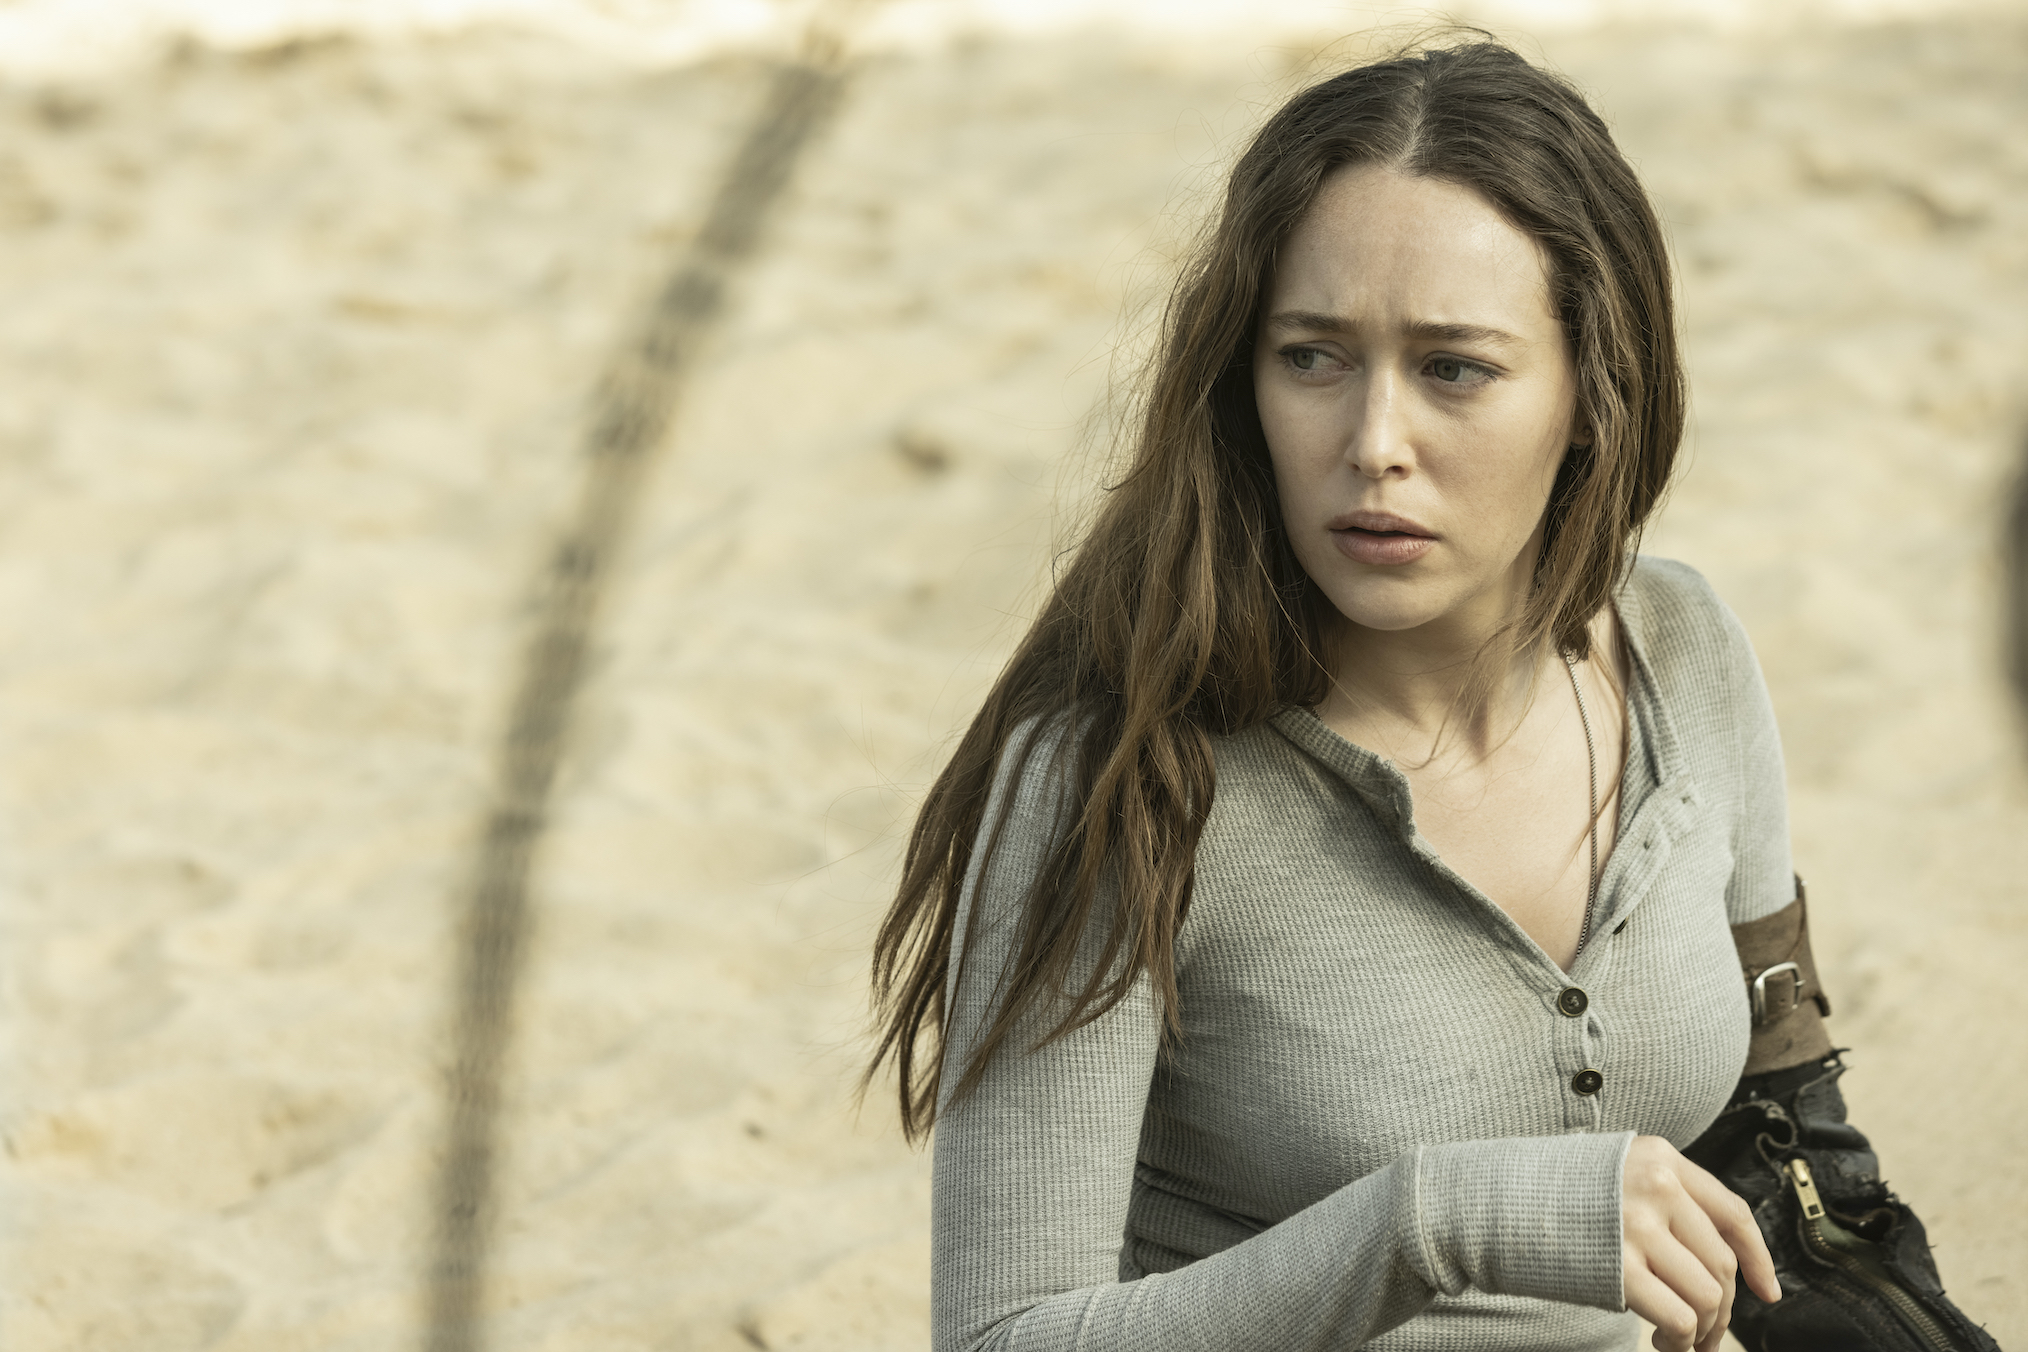 Fear The Walking Dead' Episode 100 Changes Everything for Alicia (RECAP)